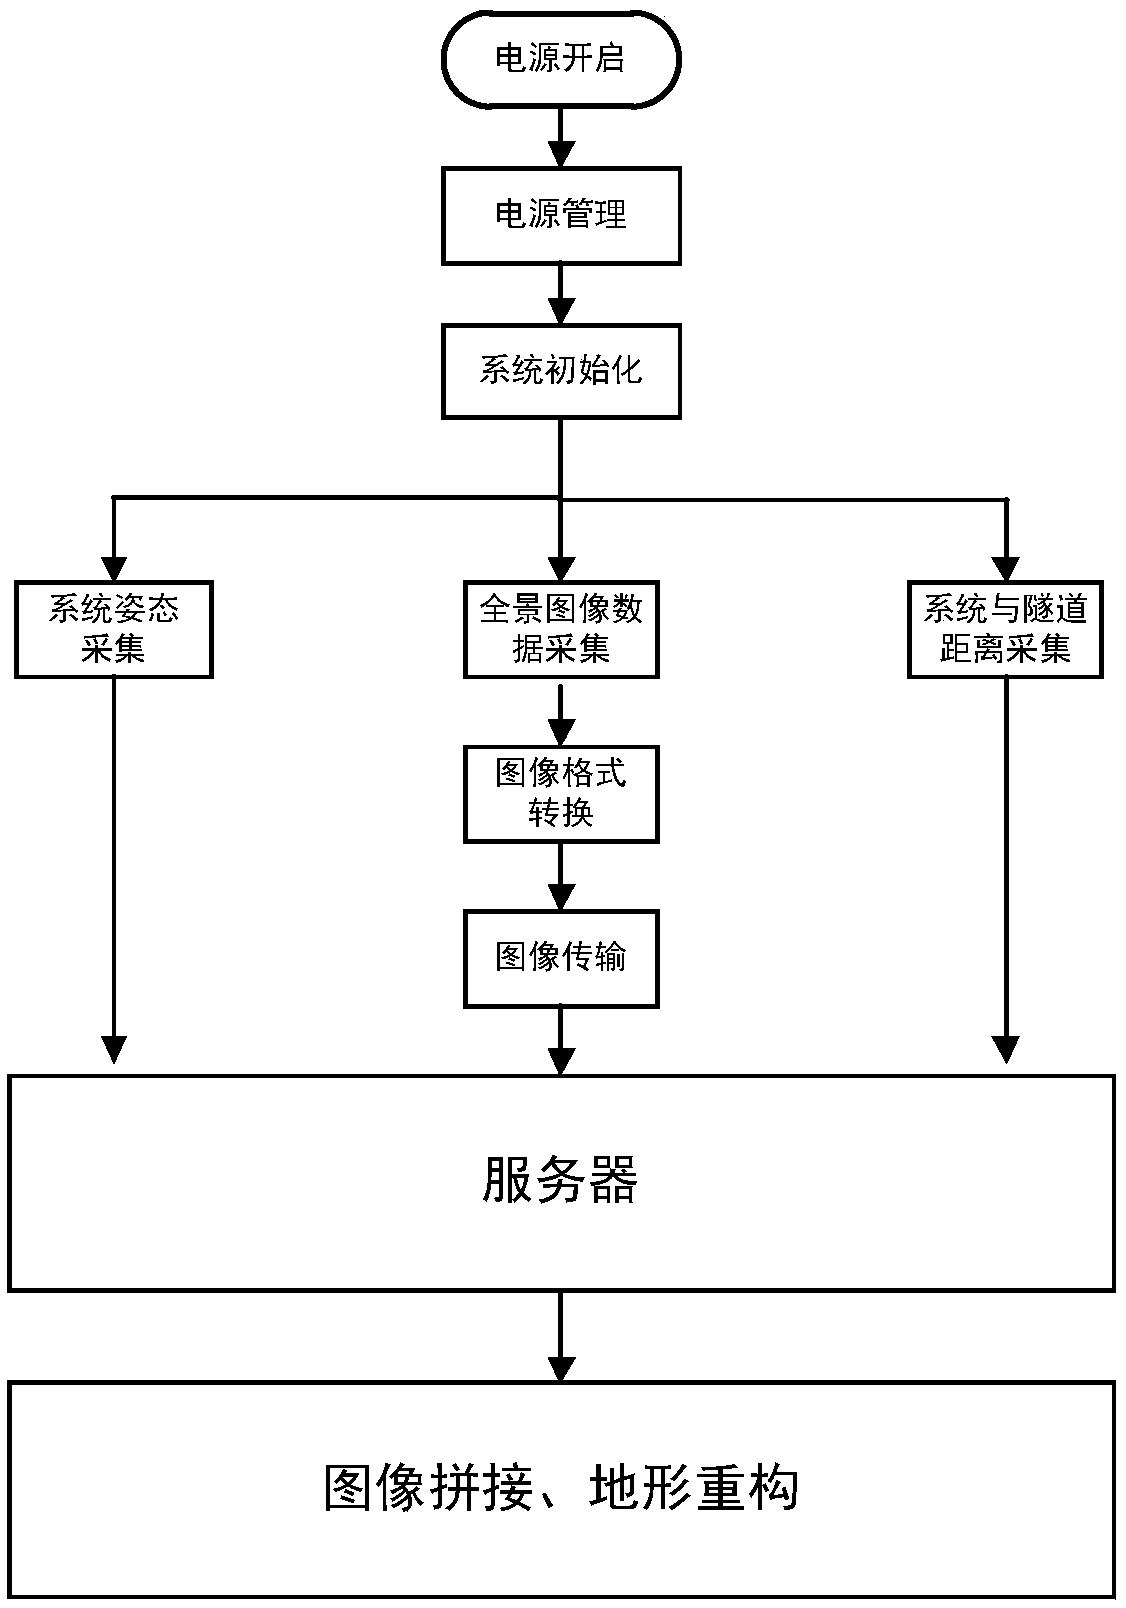 Tunnel deformation monitoring system and method